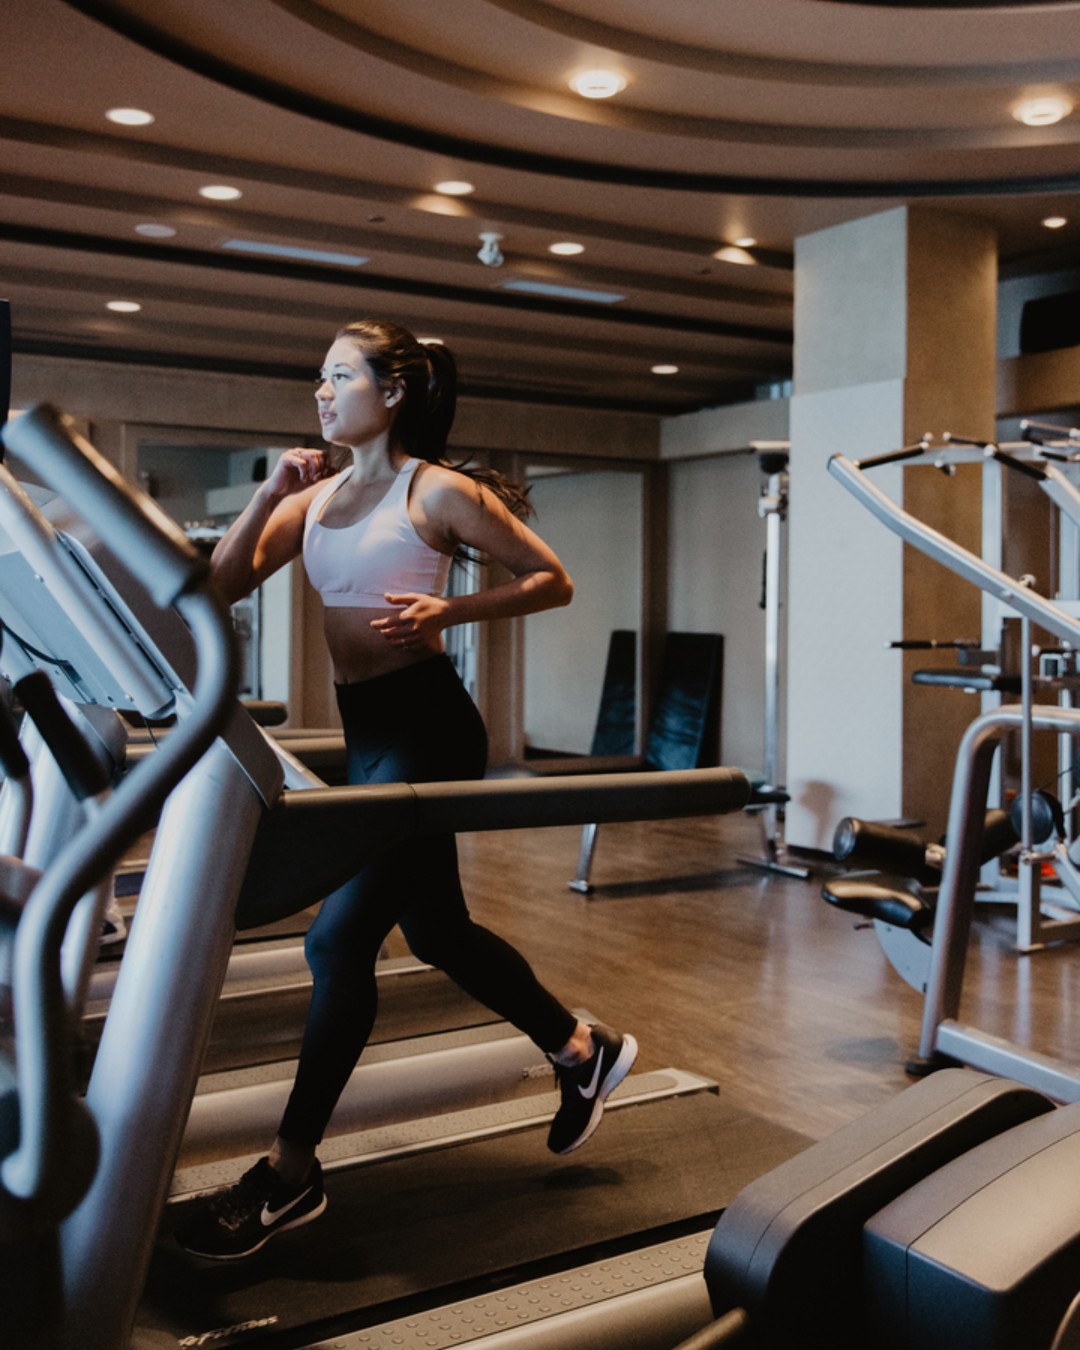 Pan Pacific Vancouver on X: Our Fitness Centre is fully equipped